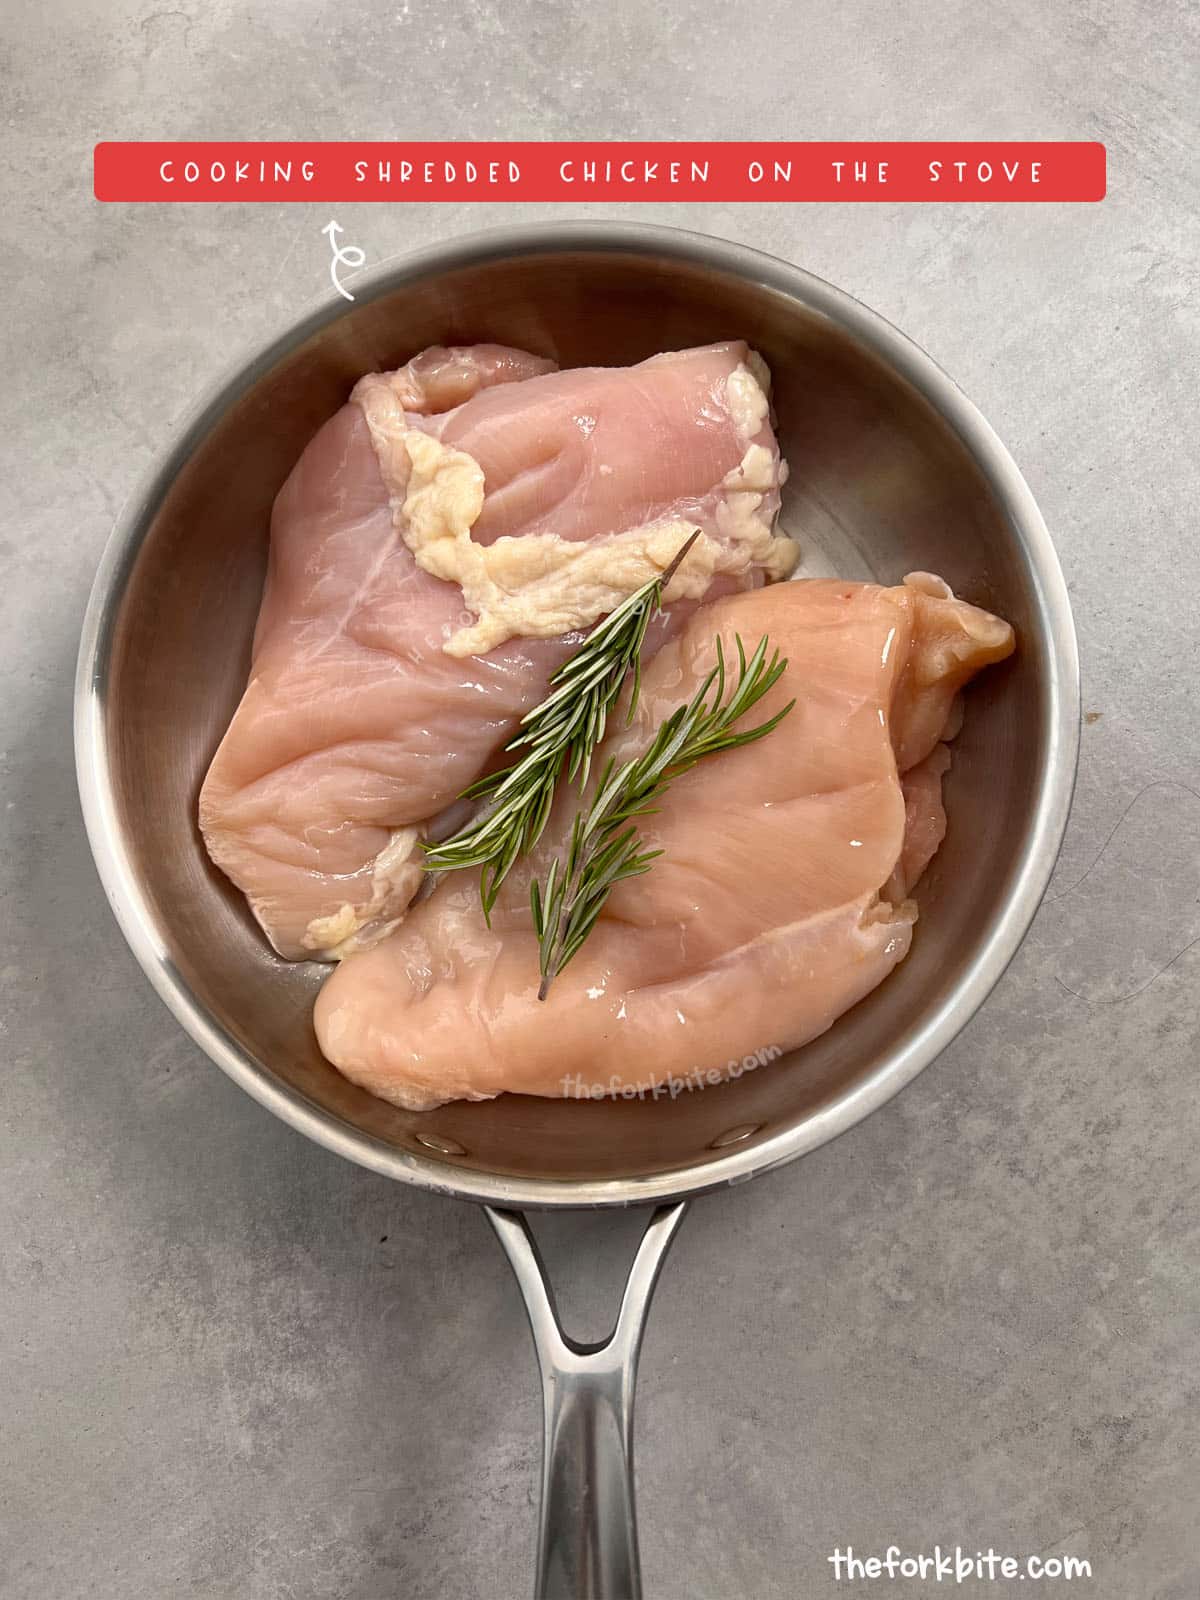 arrange the boneless chicken breast or thighs in the bottom of a large skillet. It’s ok if you overlap some of the thighs slightly, but if you have a lot of overlap, consider using a bigger pot or two pots/pans.